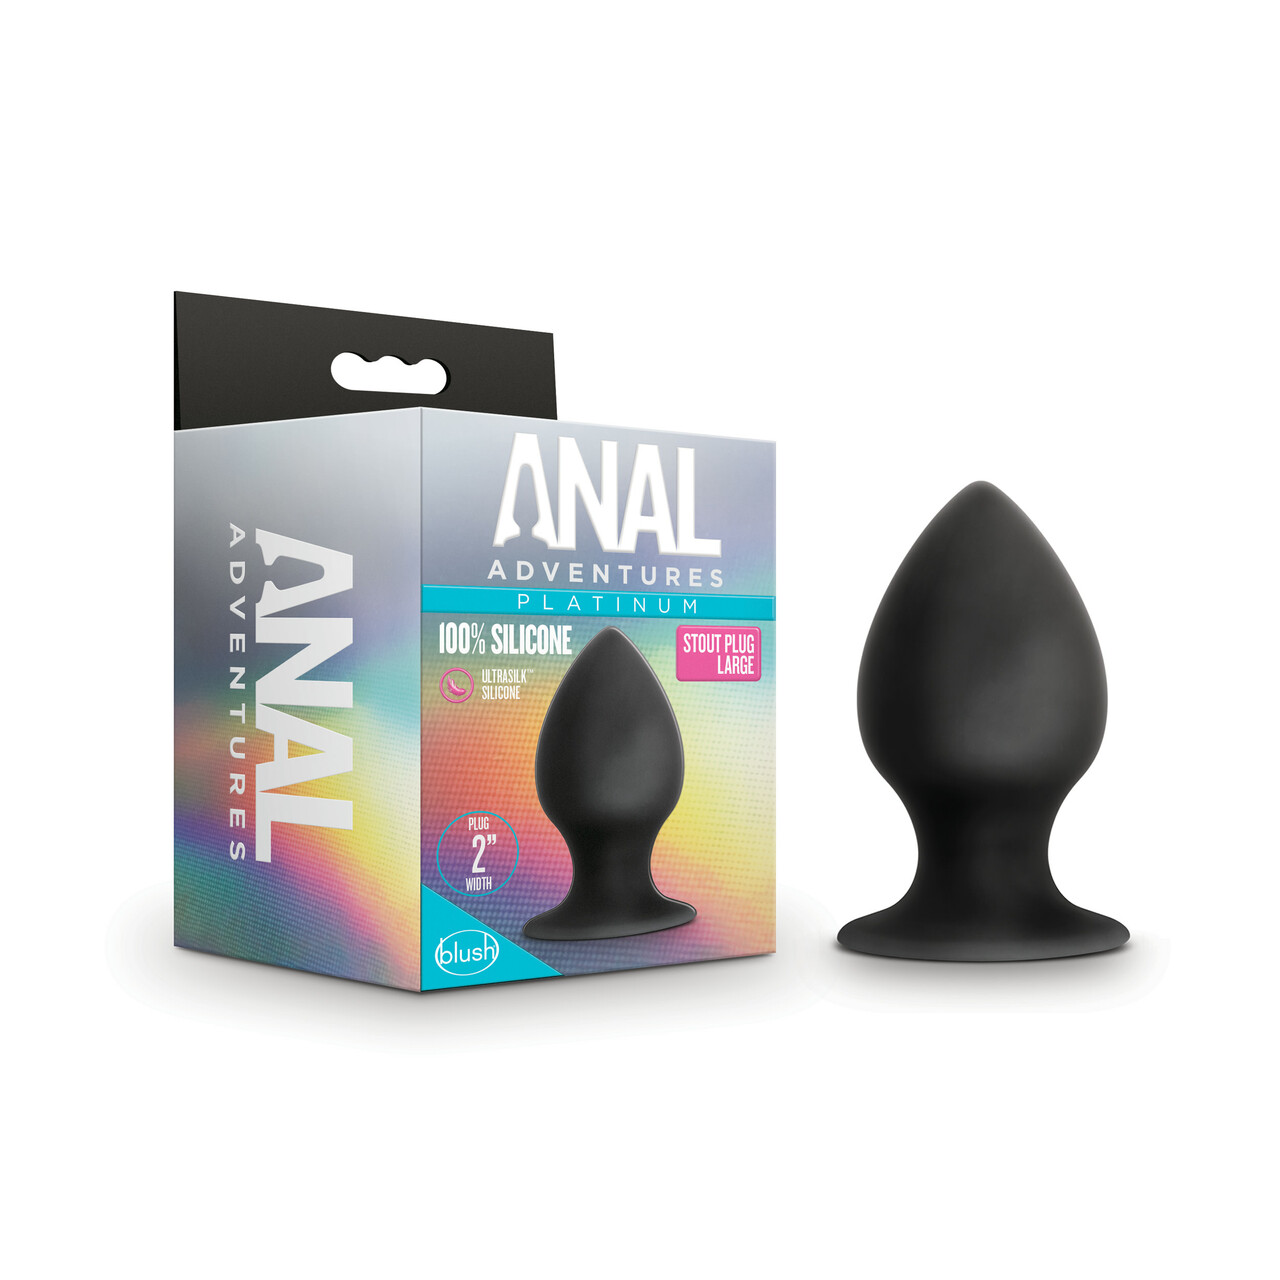 ANAL ADVENTURES PLATINUM SILICONE ANAL STOUT PLUG LARGE BLACK - Click Image to Close